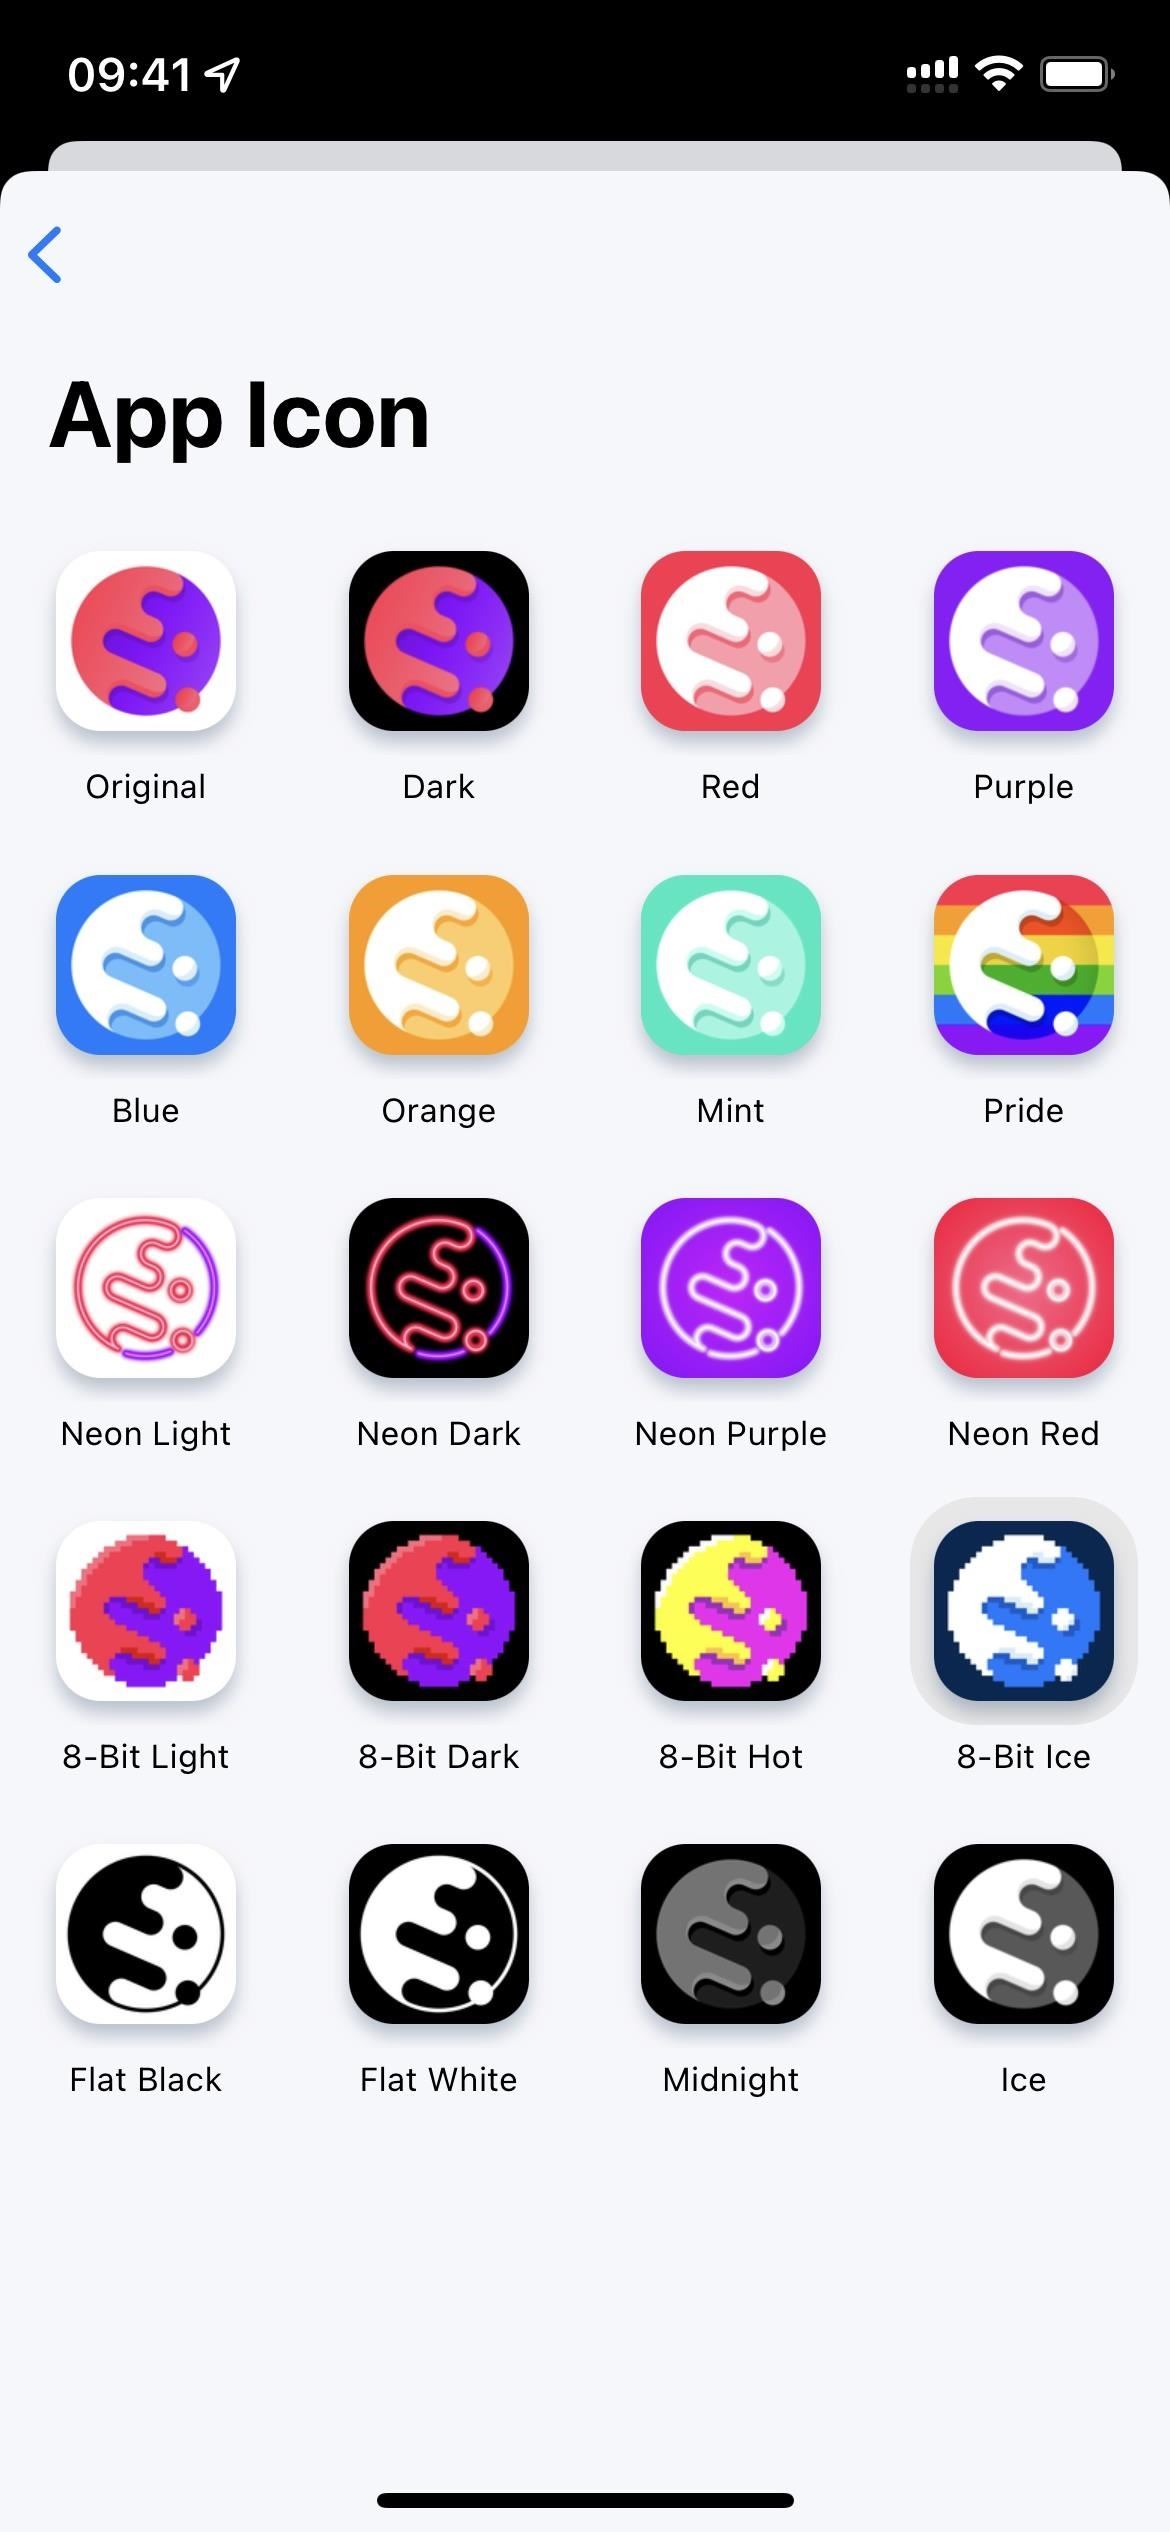 Always-Updated List of Apps That Let You Change Their Home Screen Icons on Your iPhone